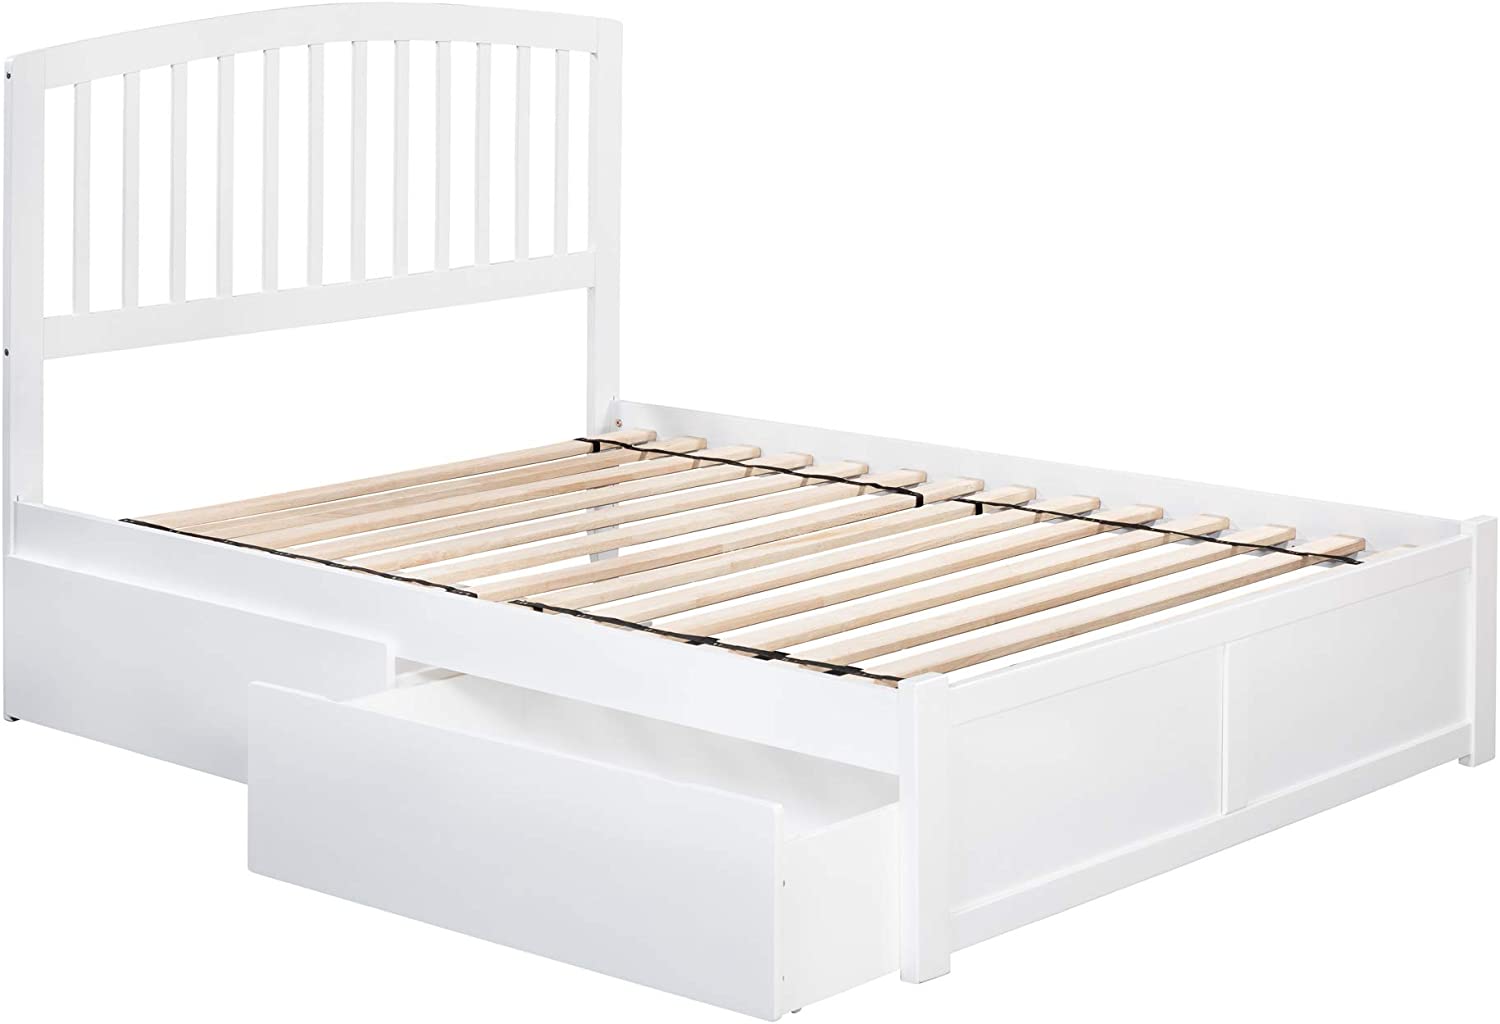 AFI AR8832112 Richmond Platform Bed with 2 Urban Bed Drawers, Full, White